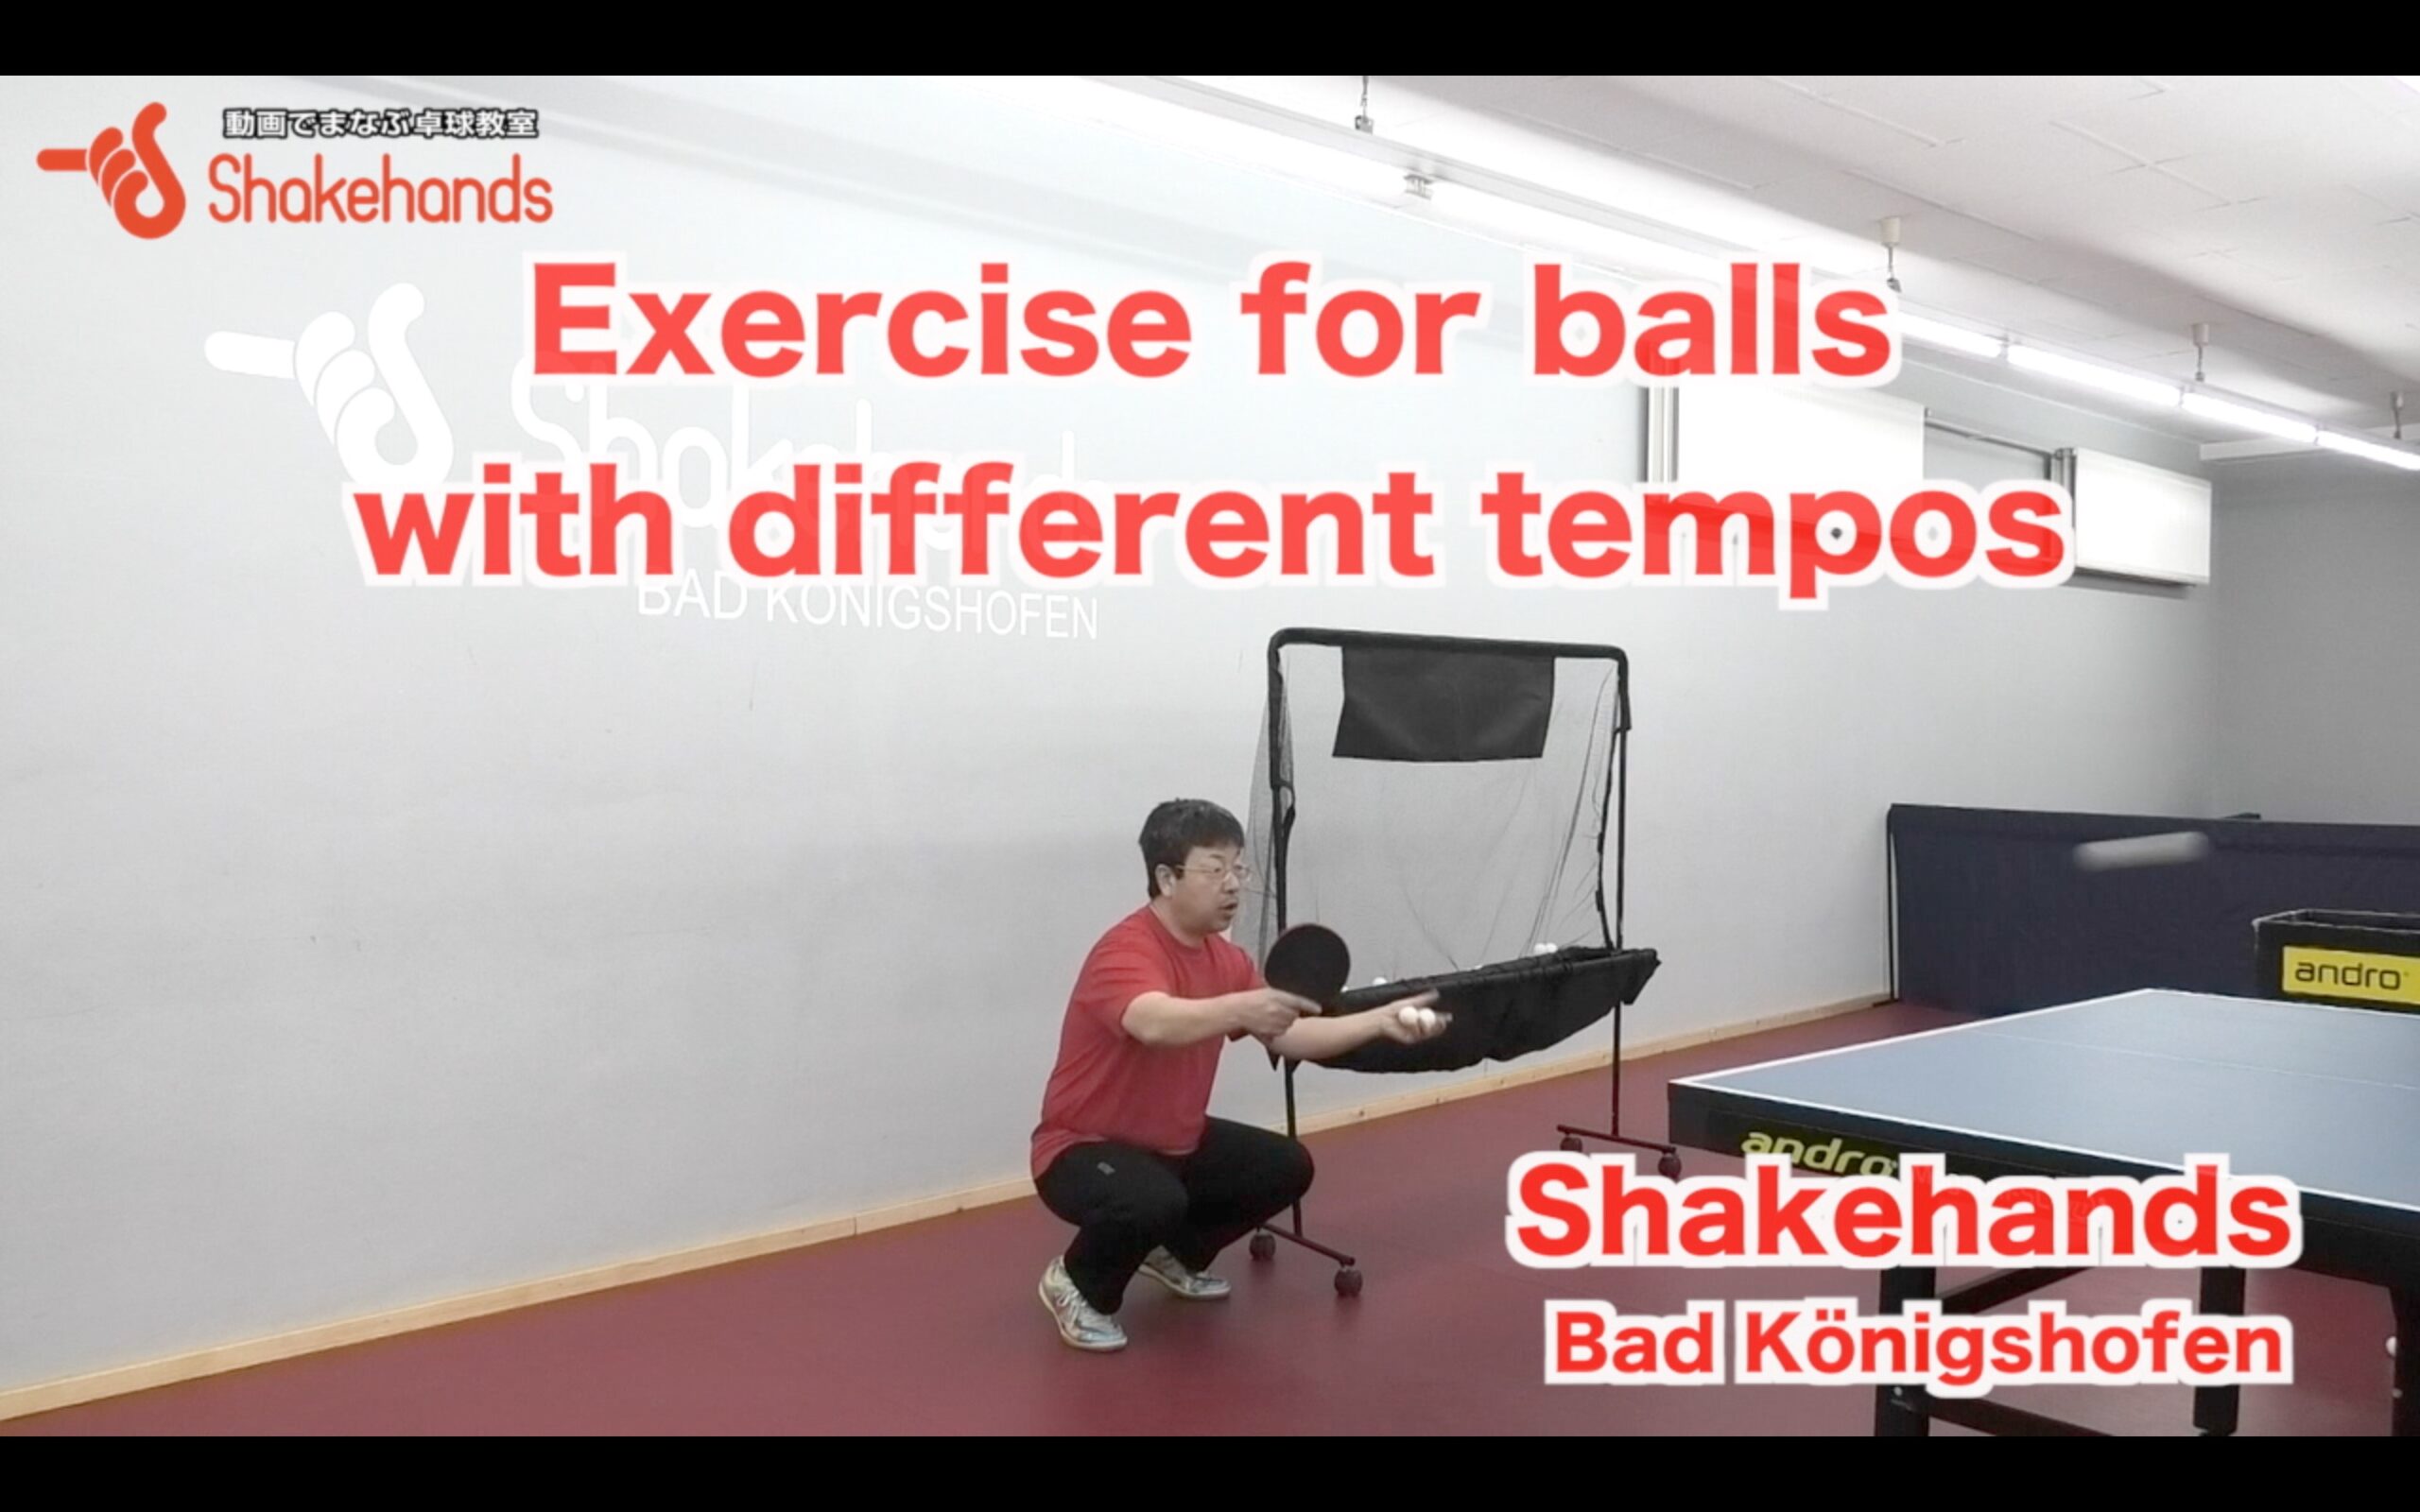 Exercise for balls with different tempos